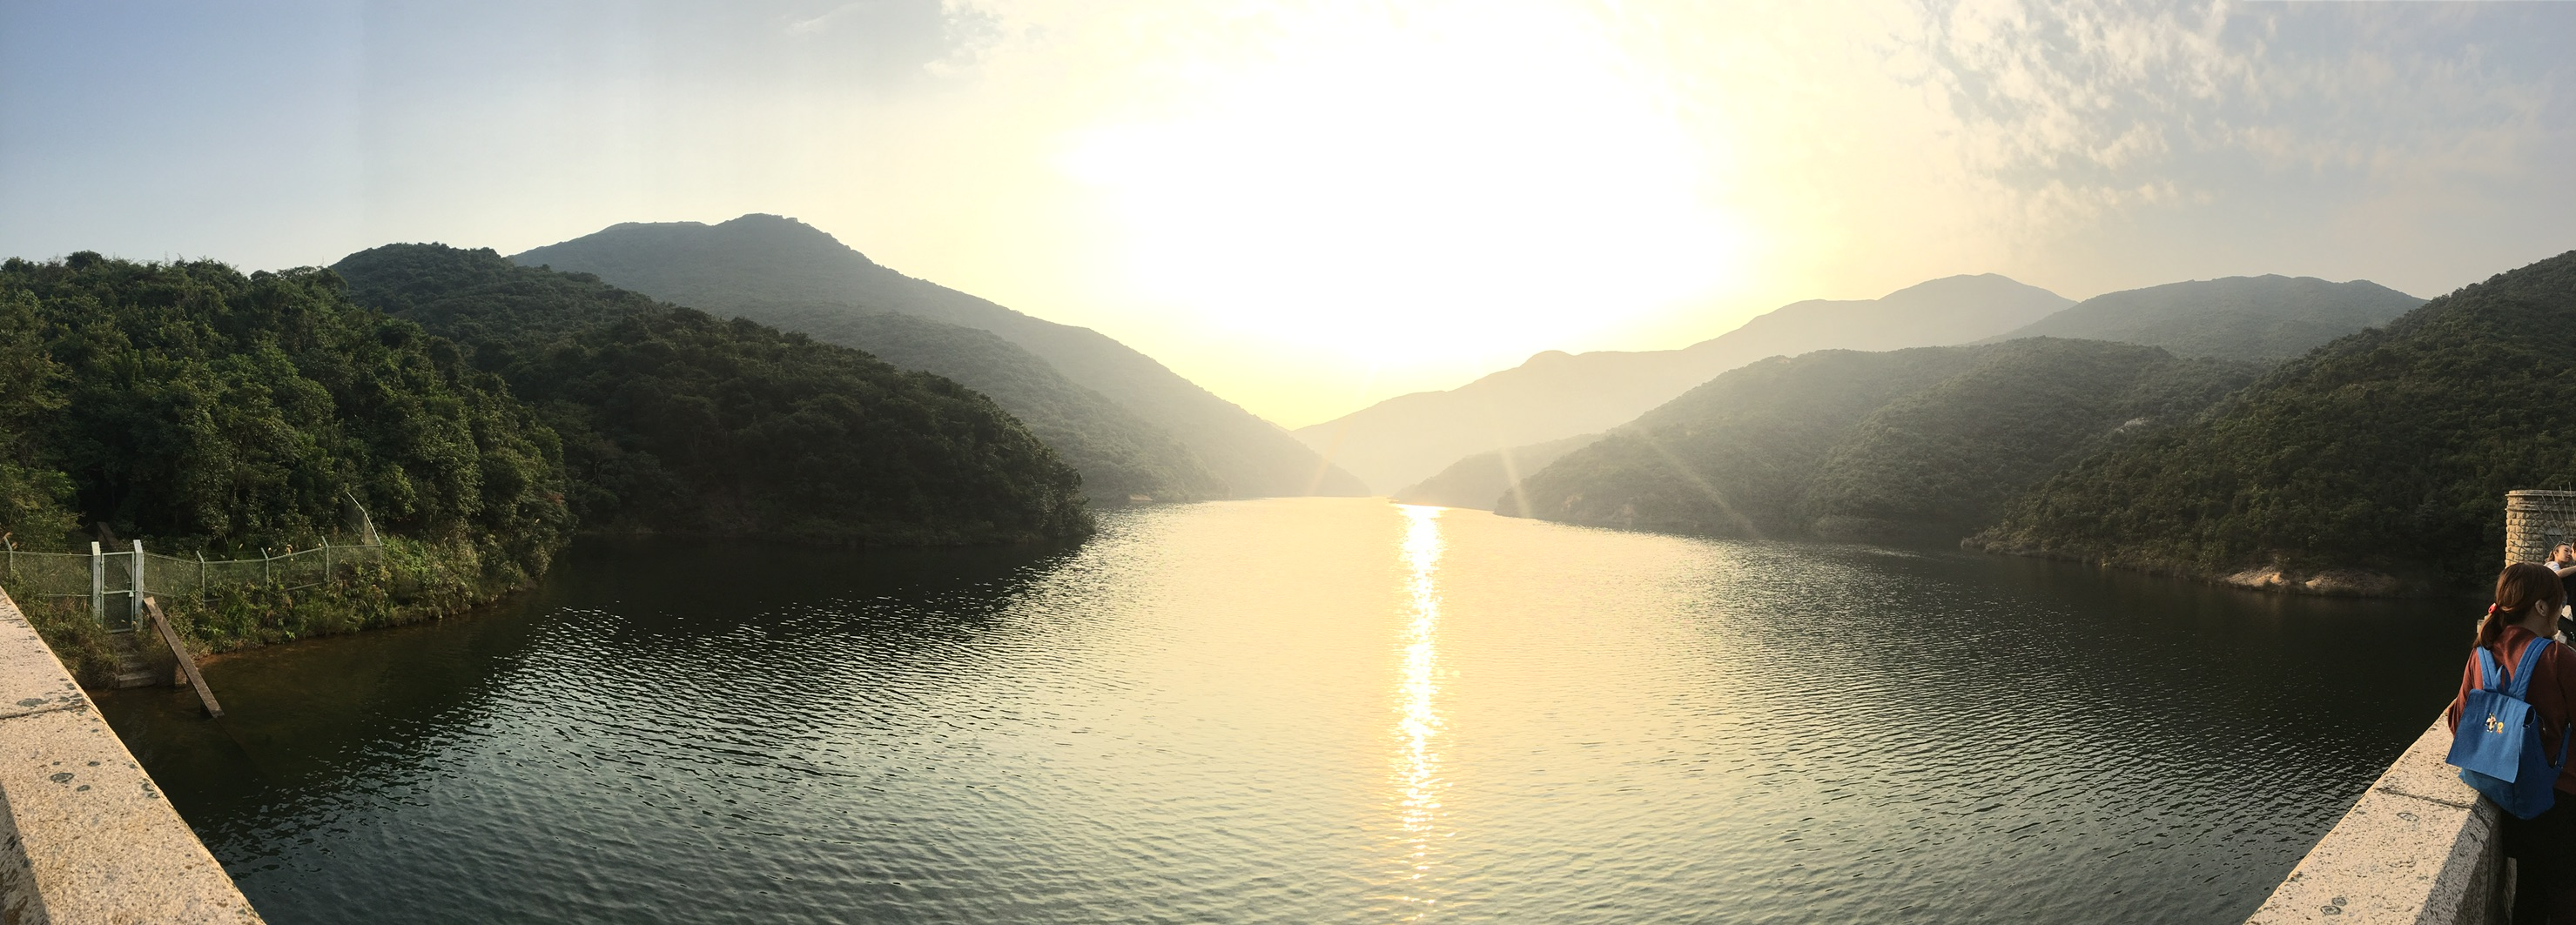 View of the Tai Tam Reservoir